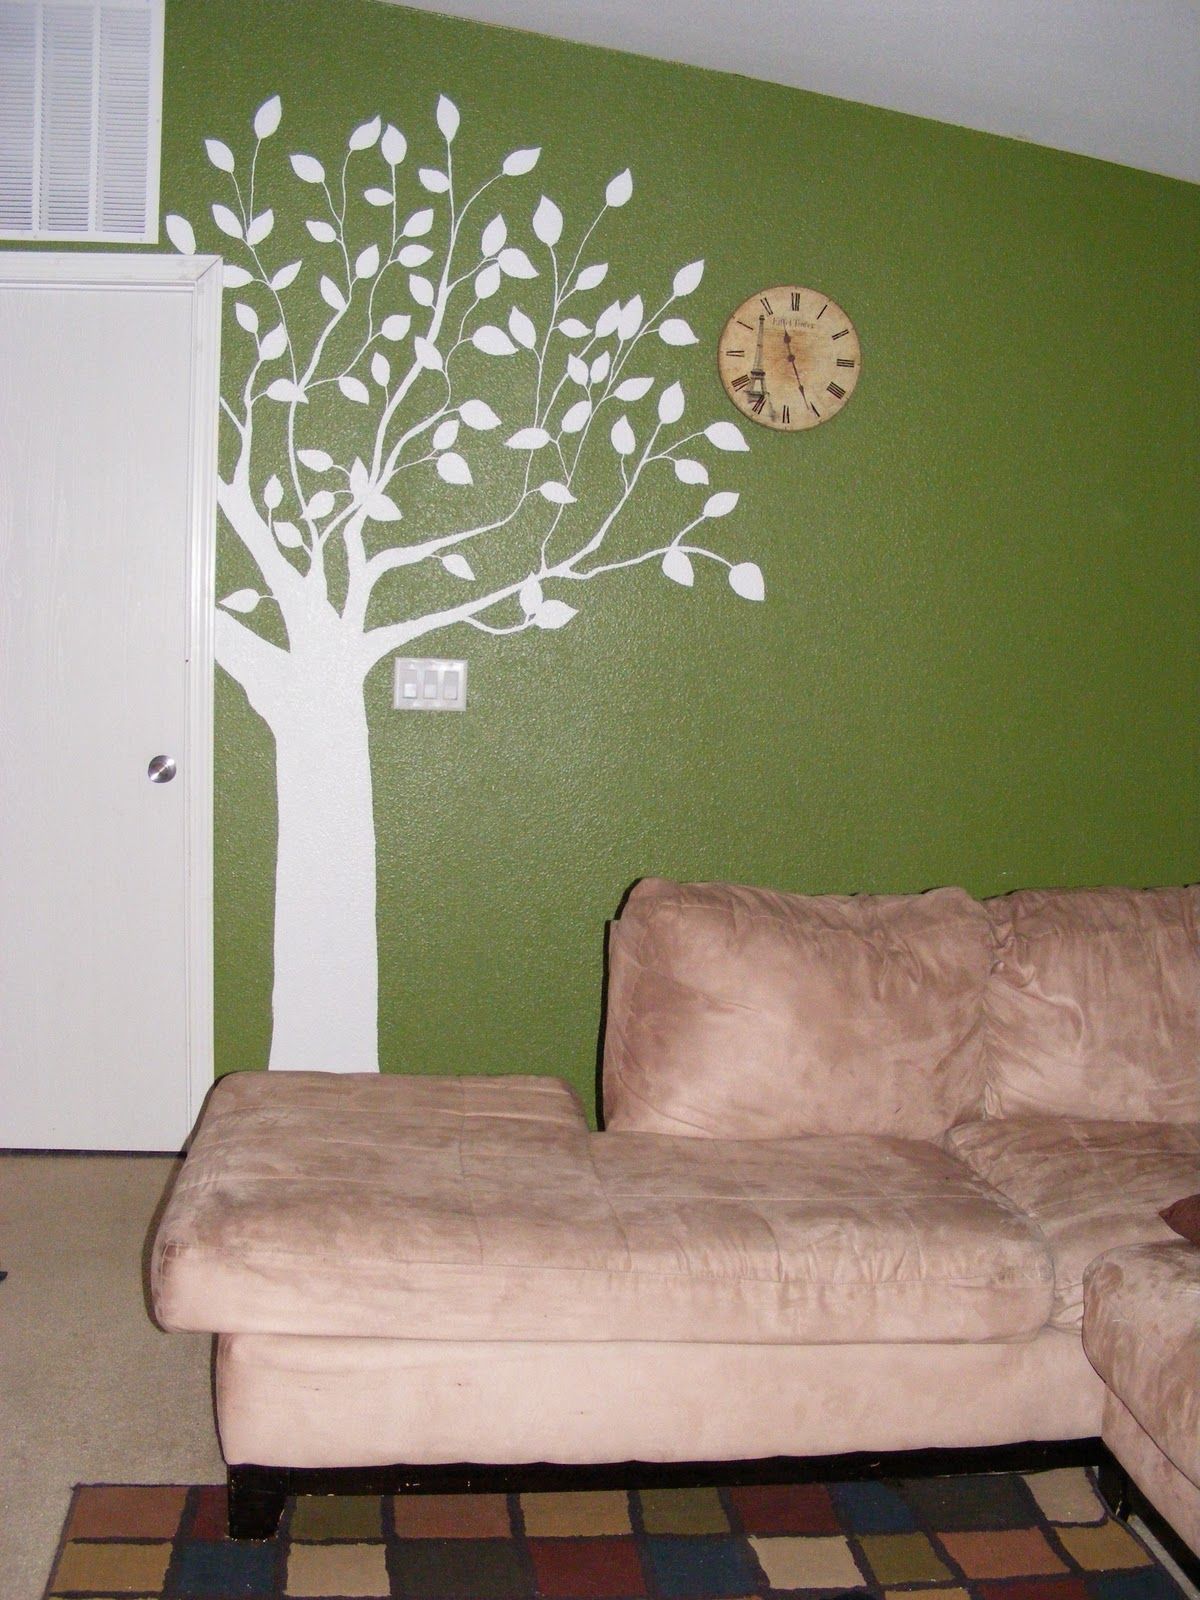 painting trees on walls in bath rooms - AT Yahoo! Search Results ...